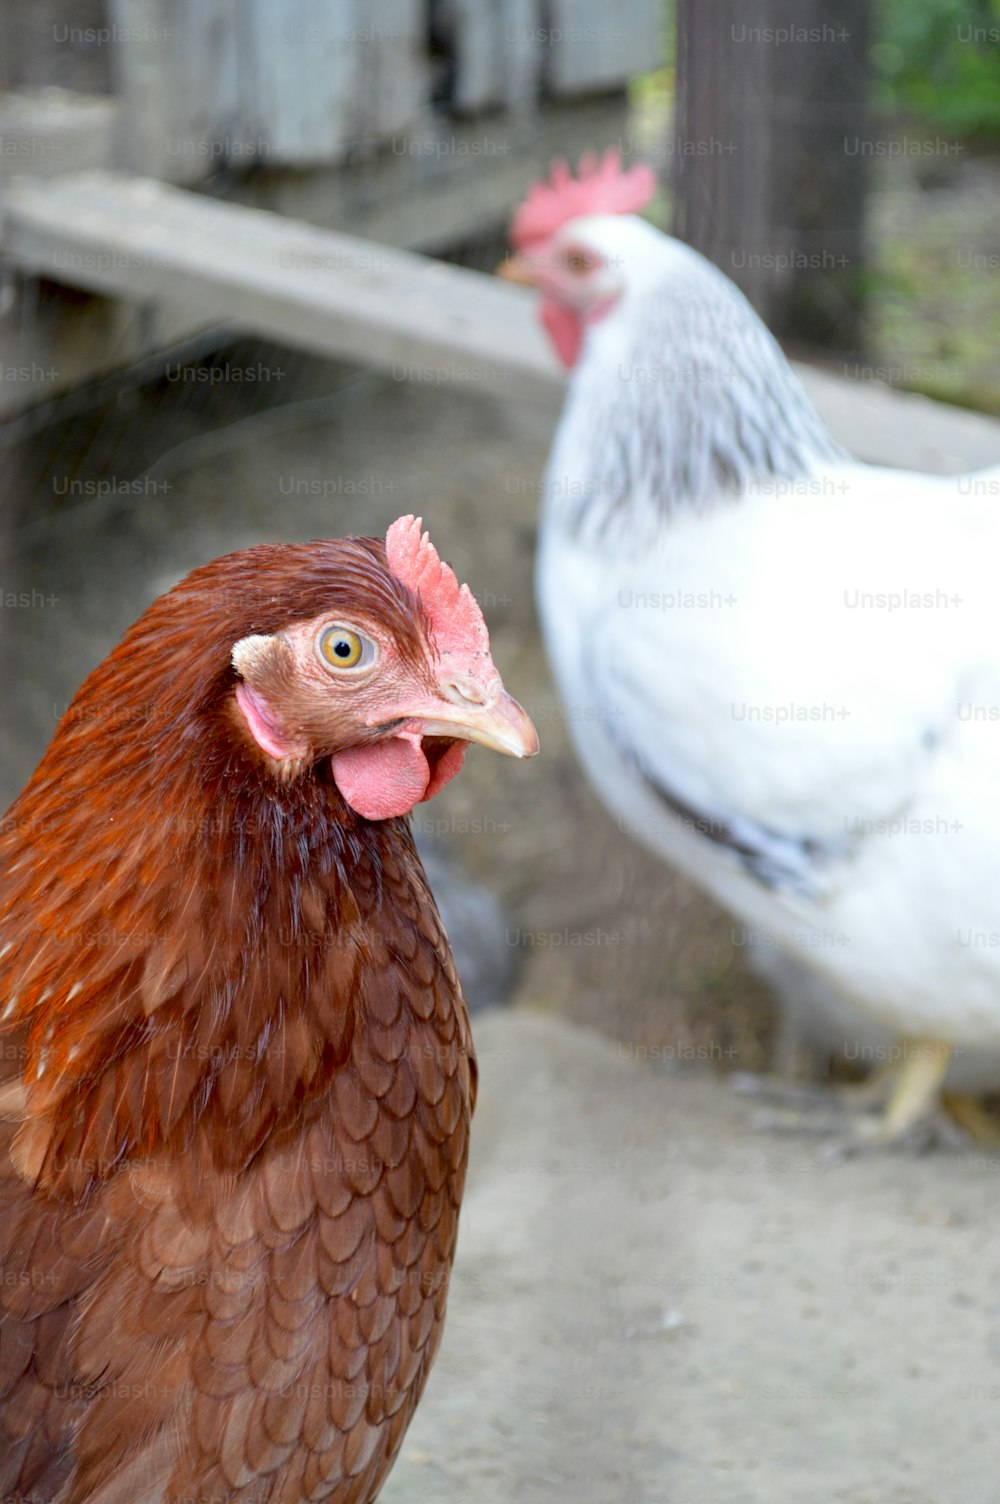 a close up of two chickens near one another